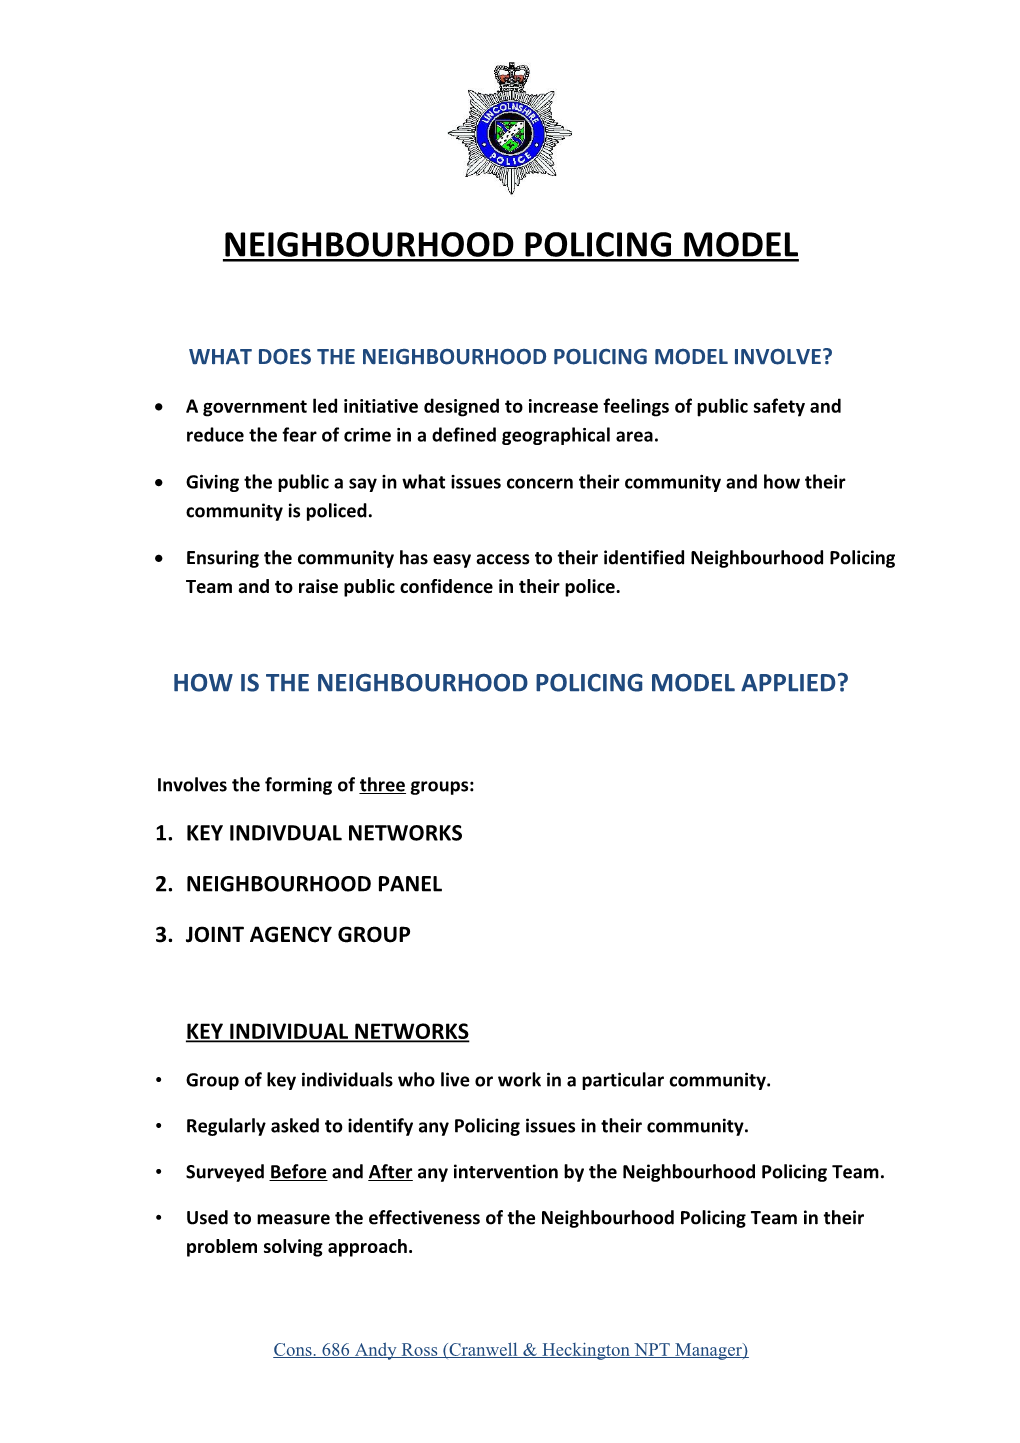 What Does the Neighbourhood Policing Model Involve?